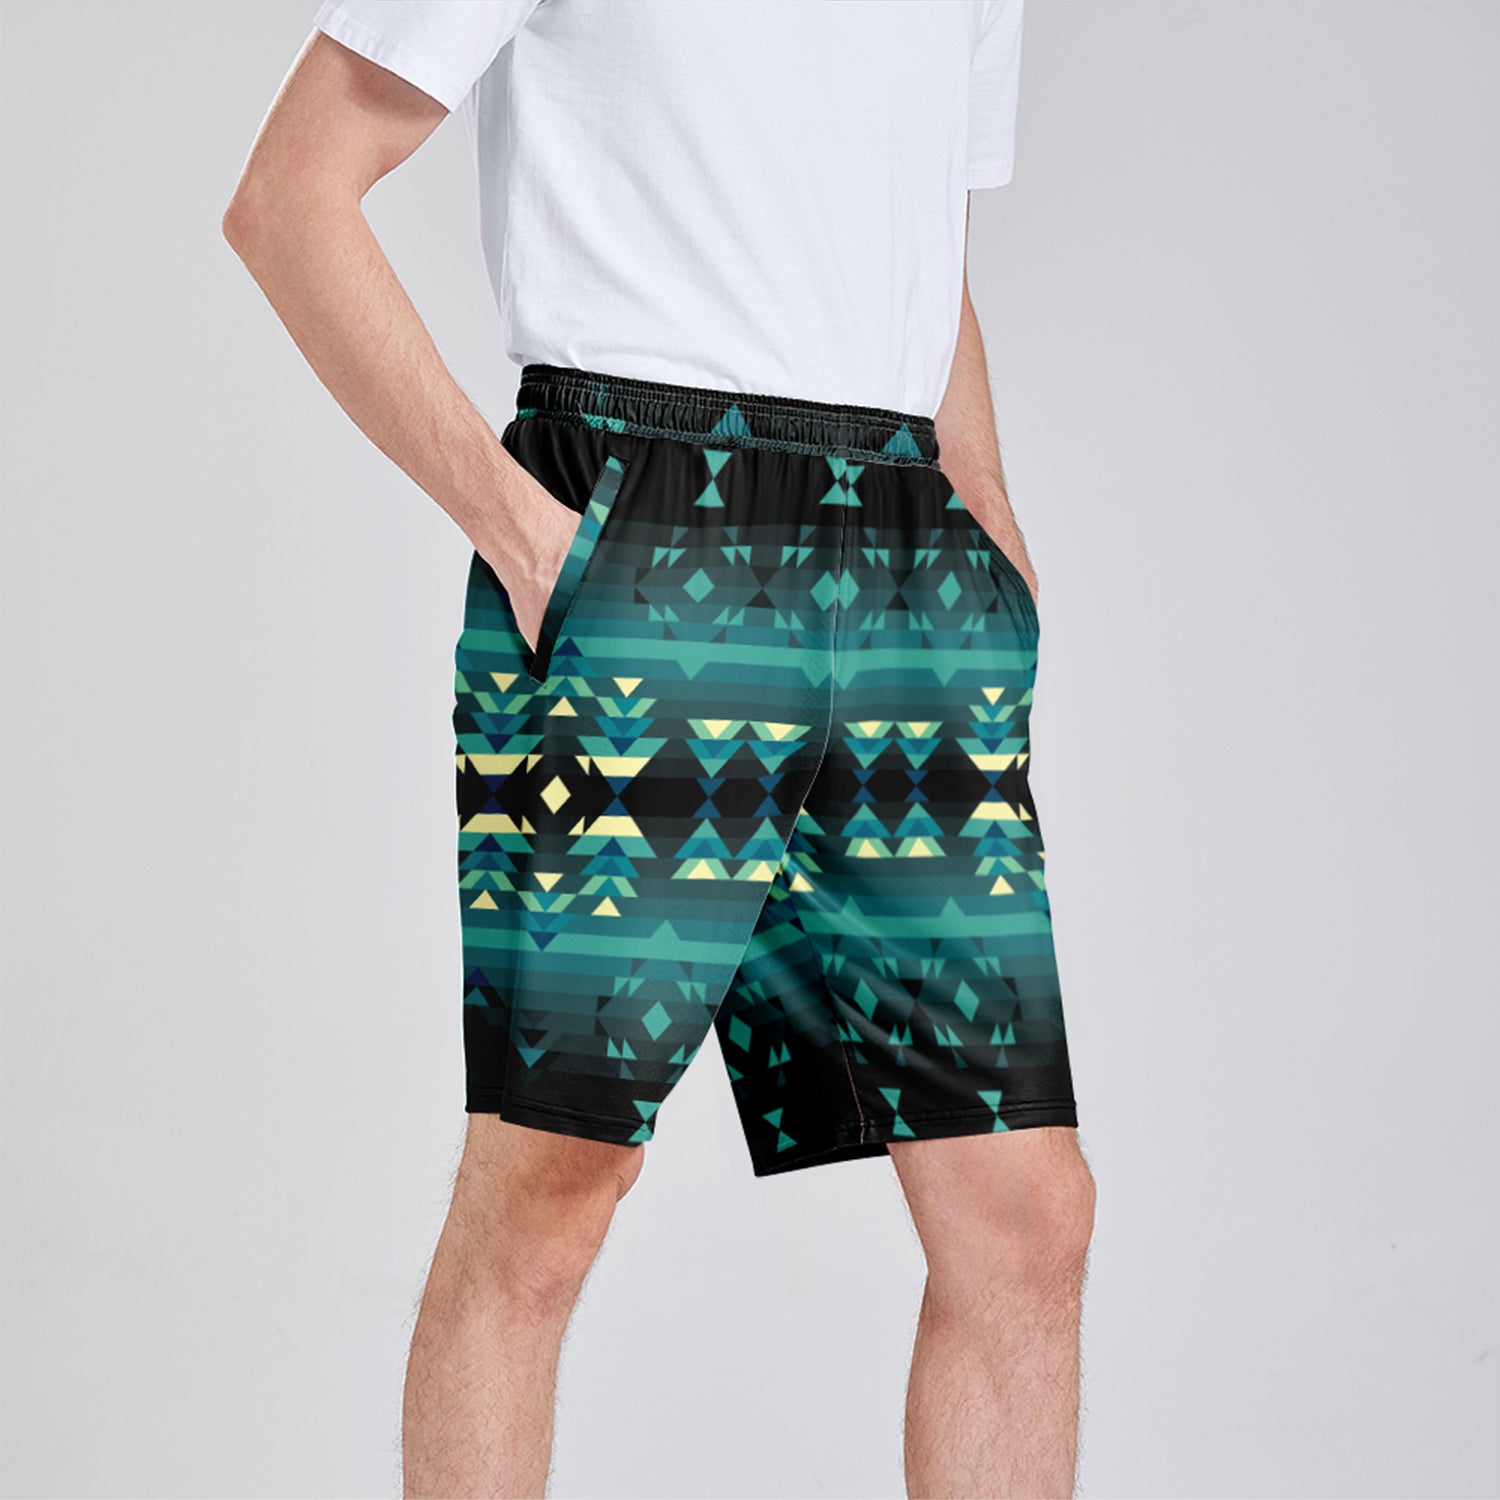 Inspire Green Athletic Shorts with Pockets